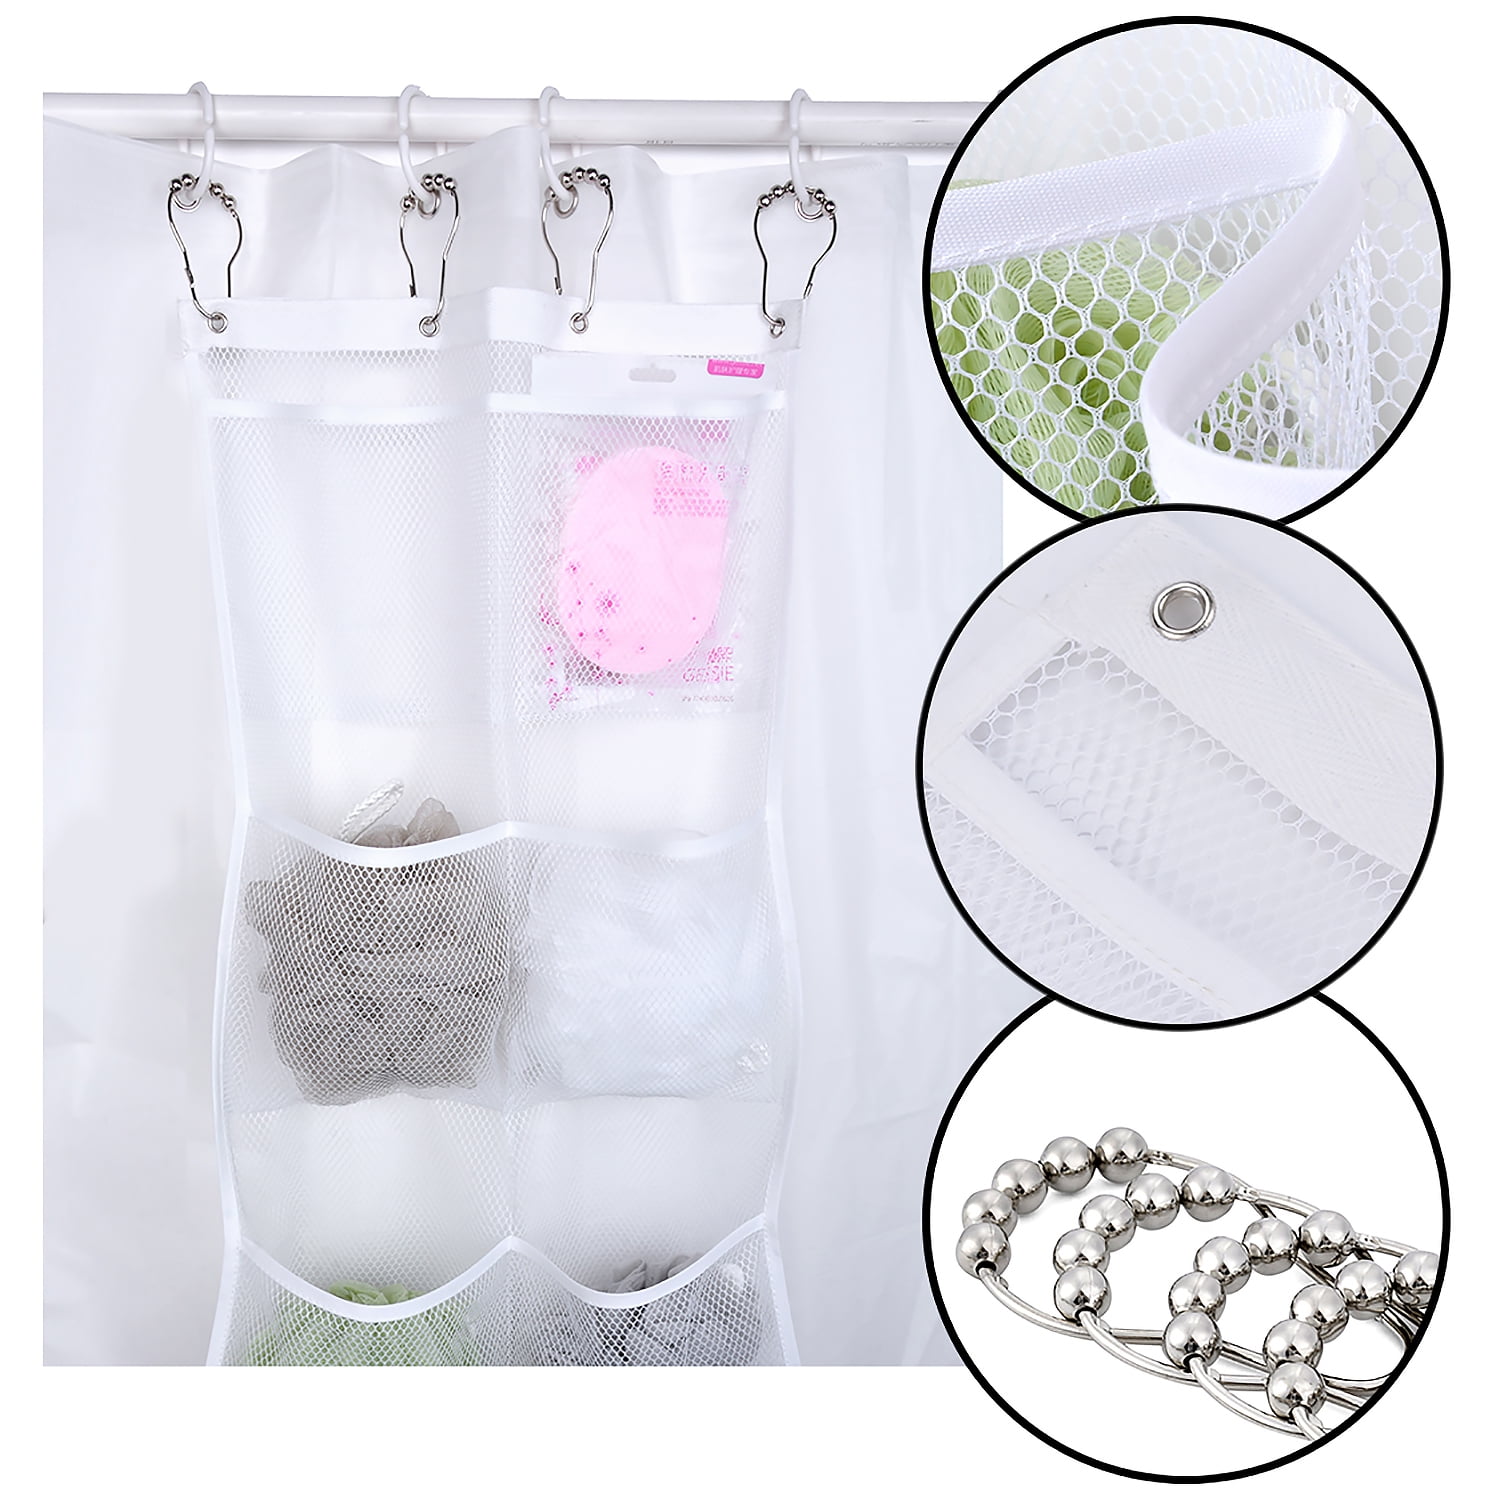 TSV Mesh Shower Caddy Curtains Organizer, Hanging Bathroom Shower Curtain  Rod Liner Hooks Accessories with 6 Pockets Save Space in Small Bathroom Tub